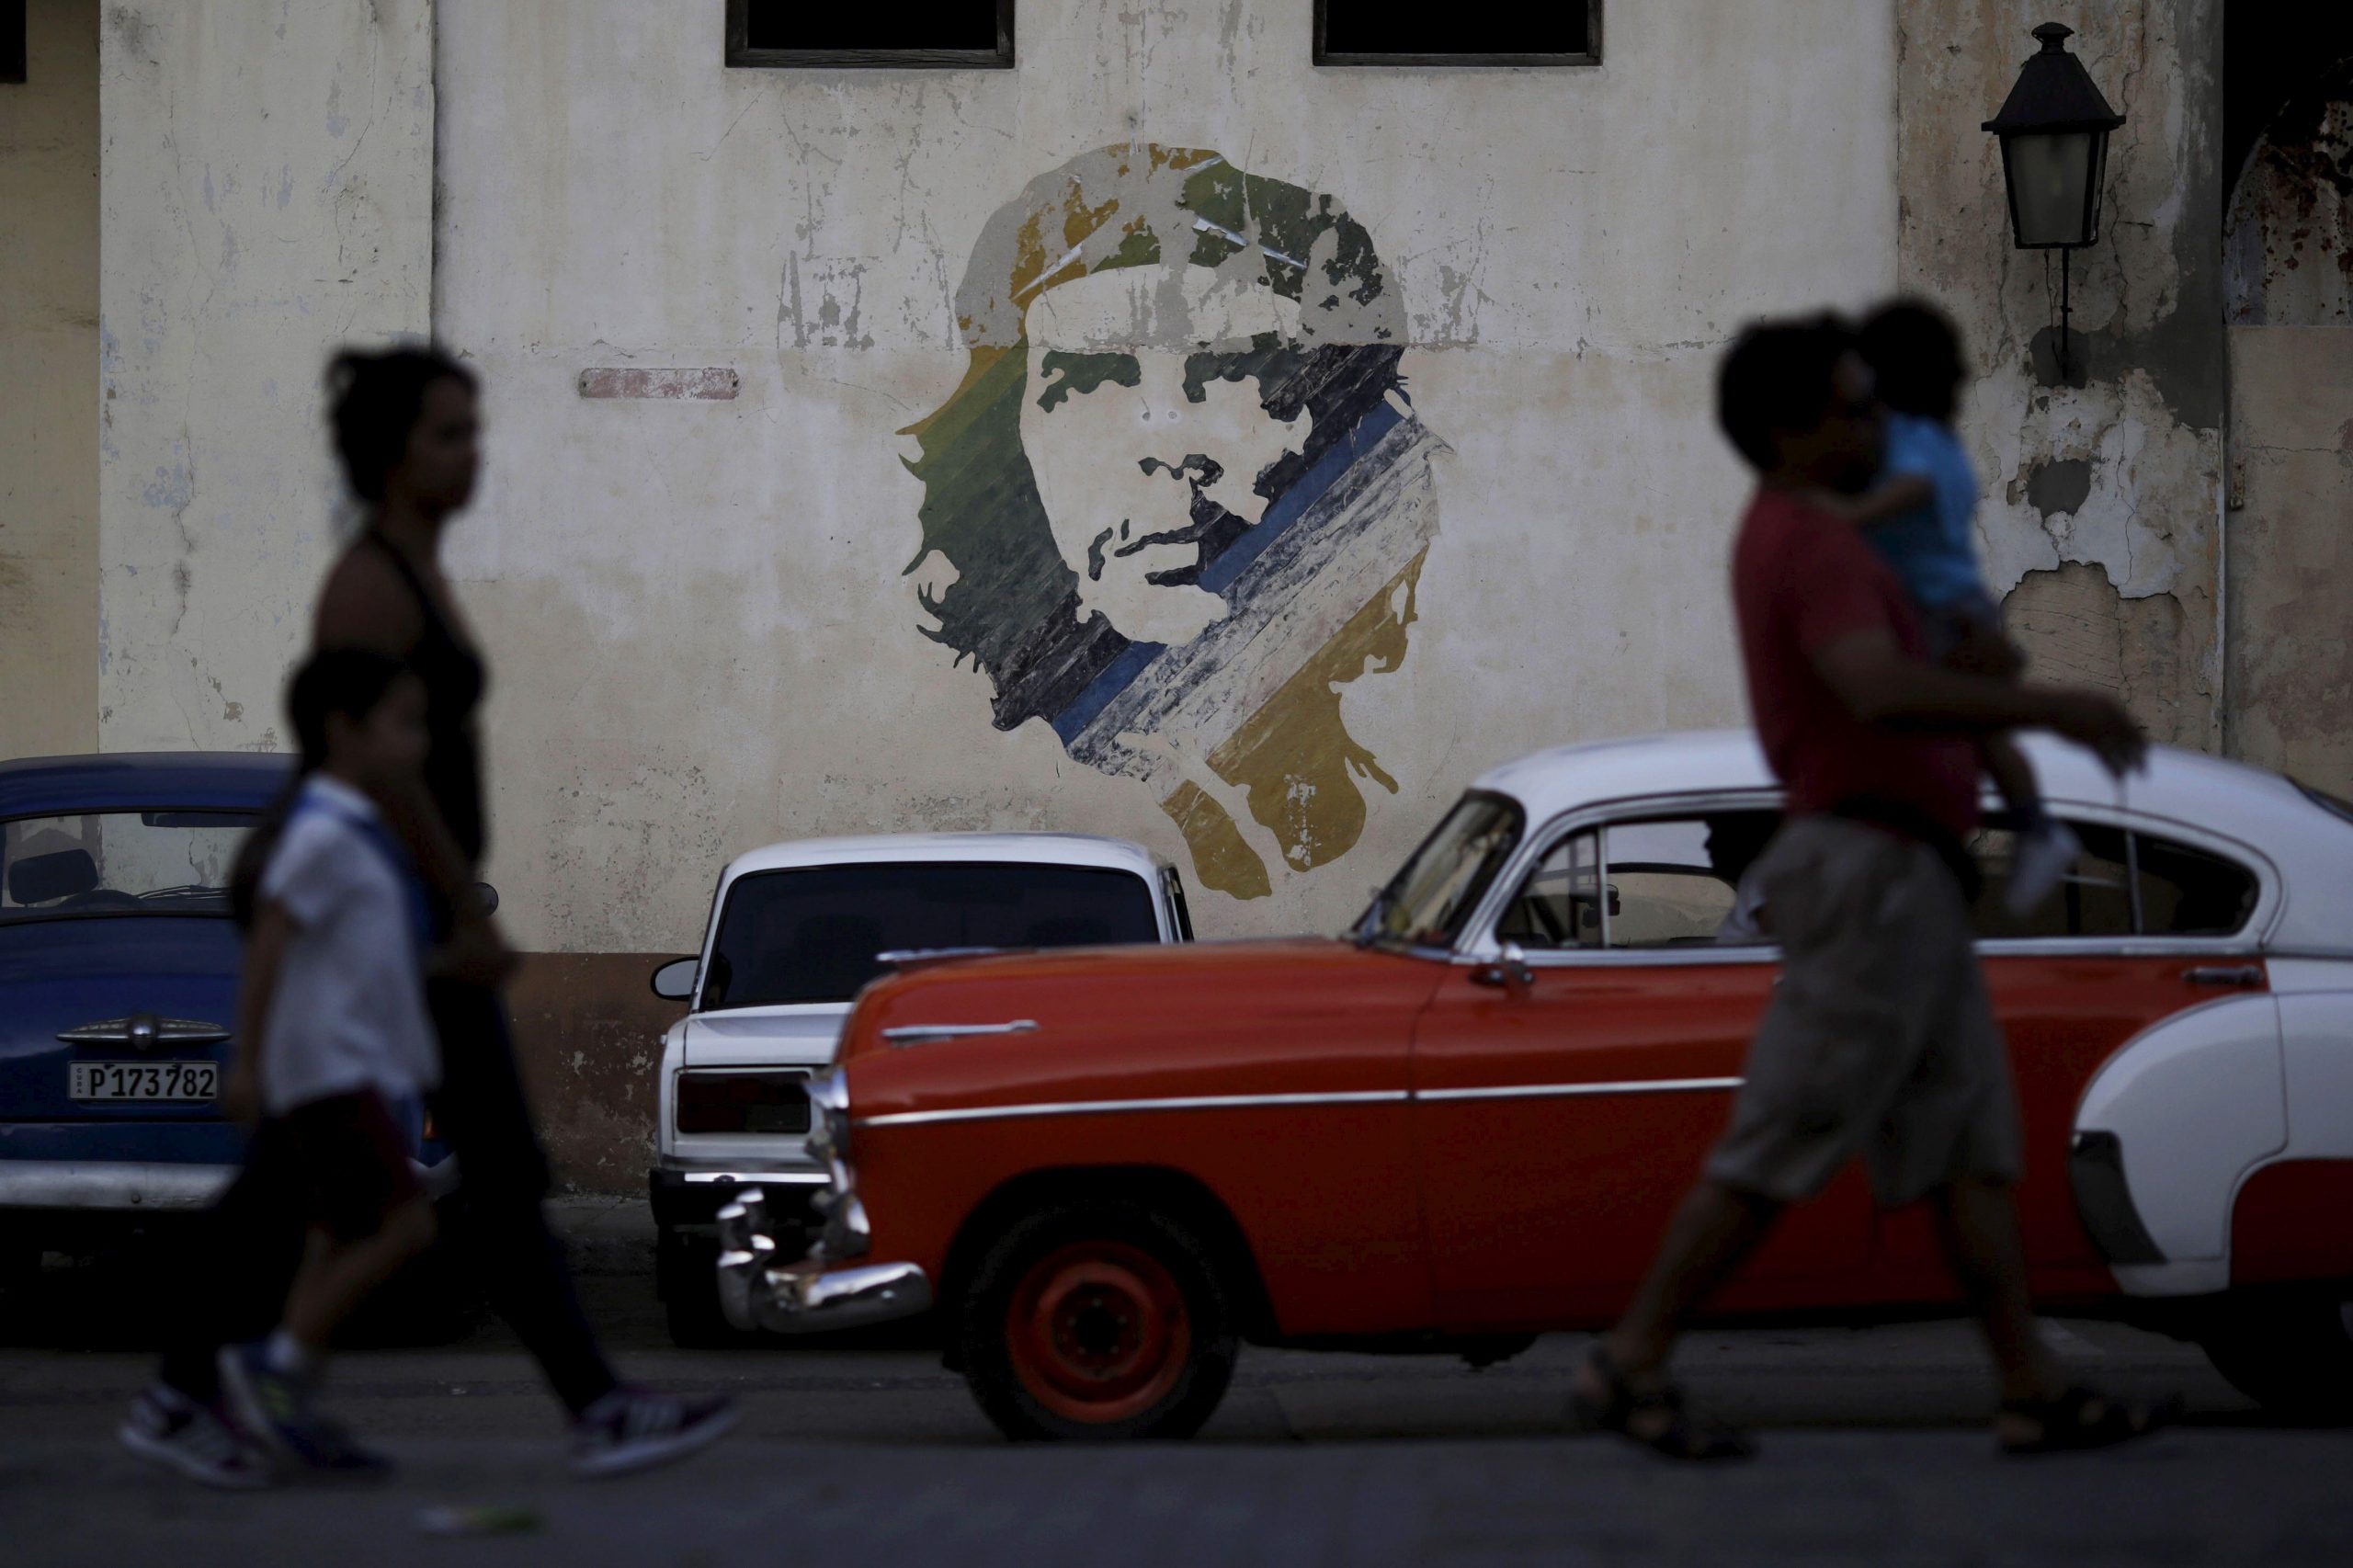 The world must look beyond Cuba’s carefully manufactured PR image